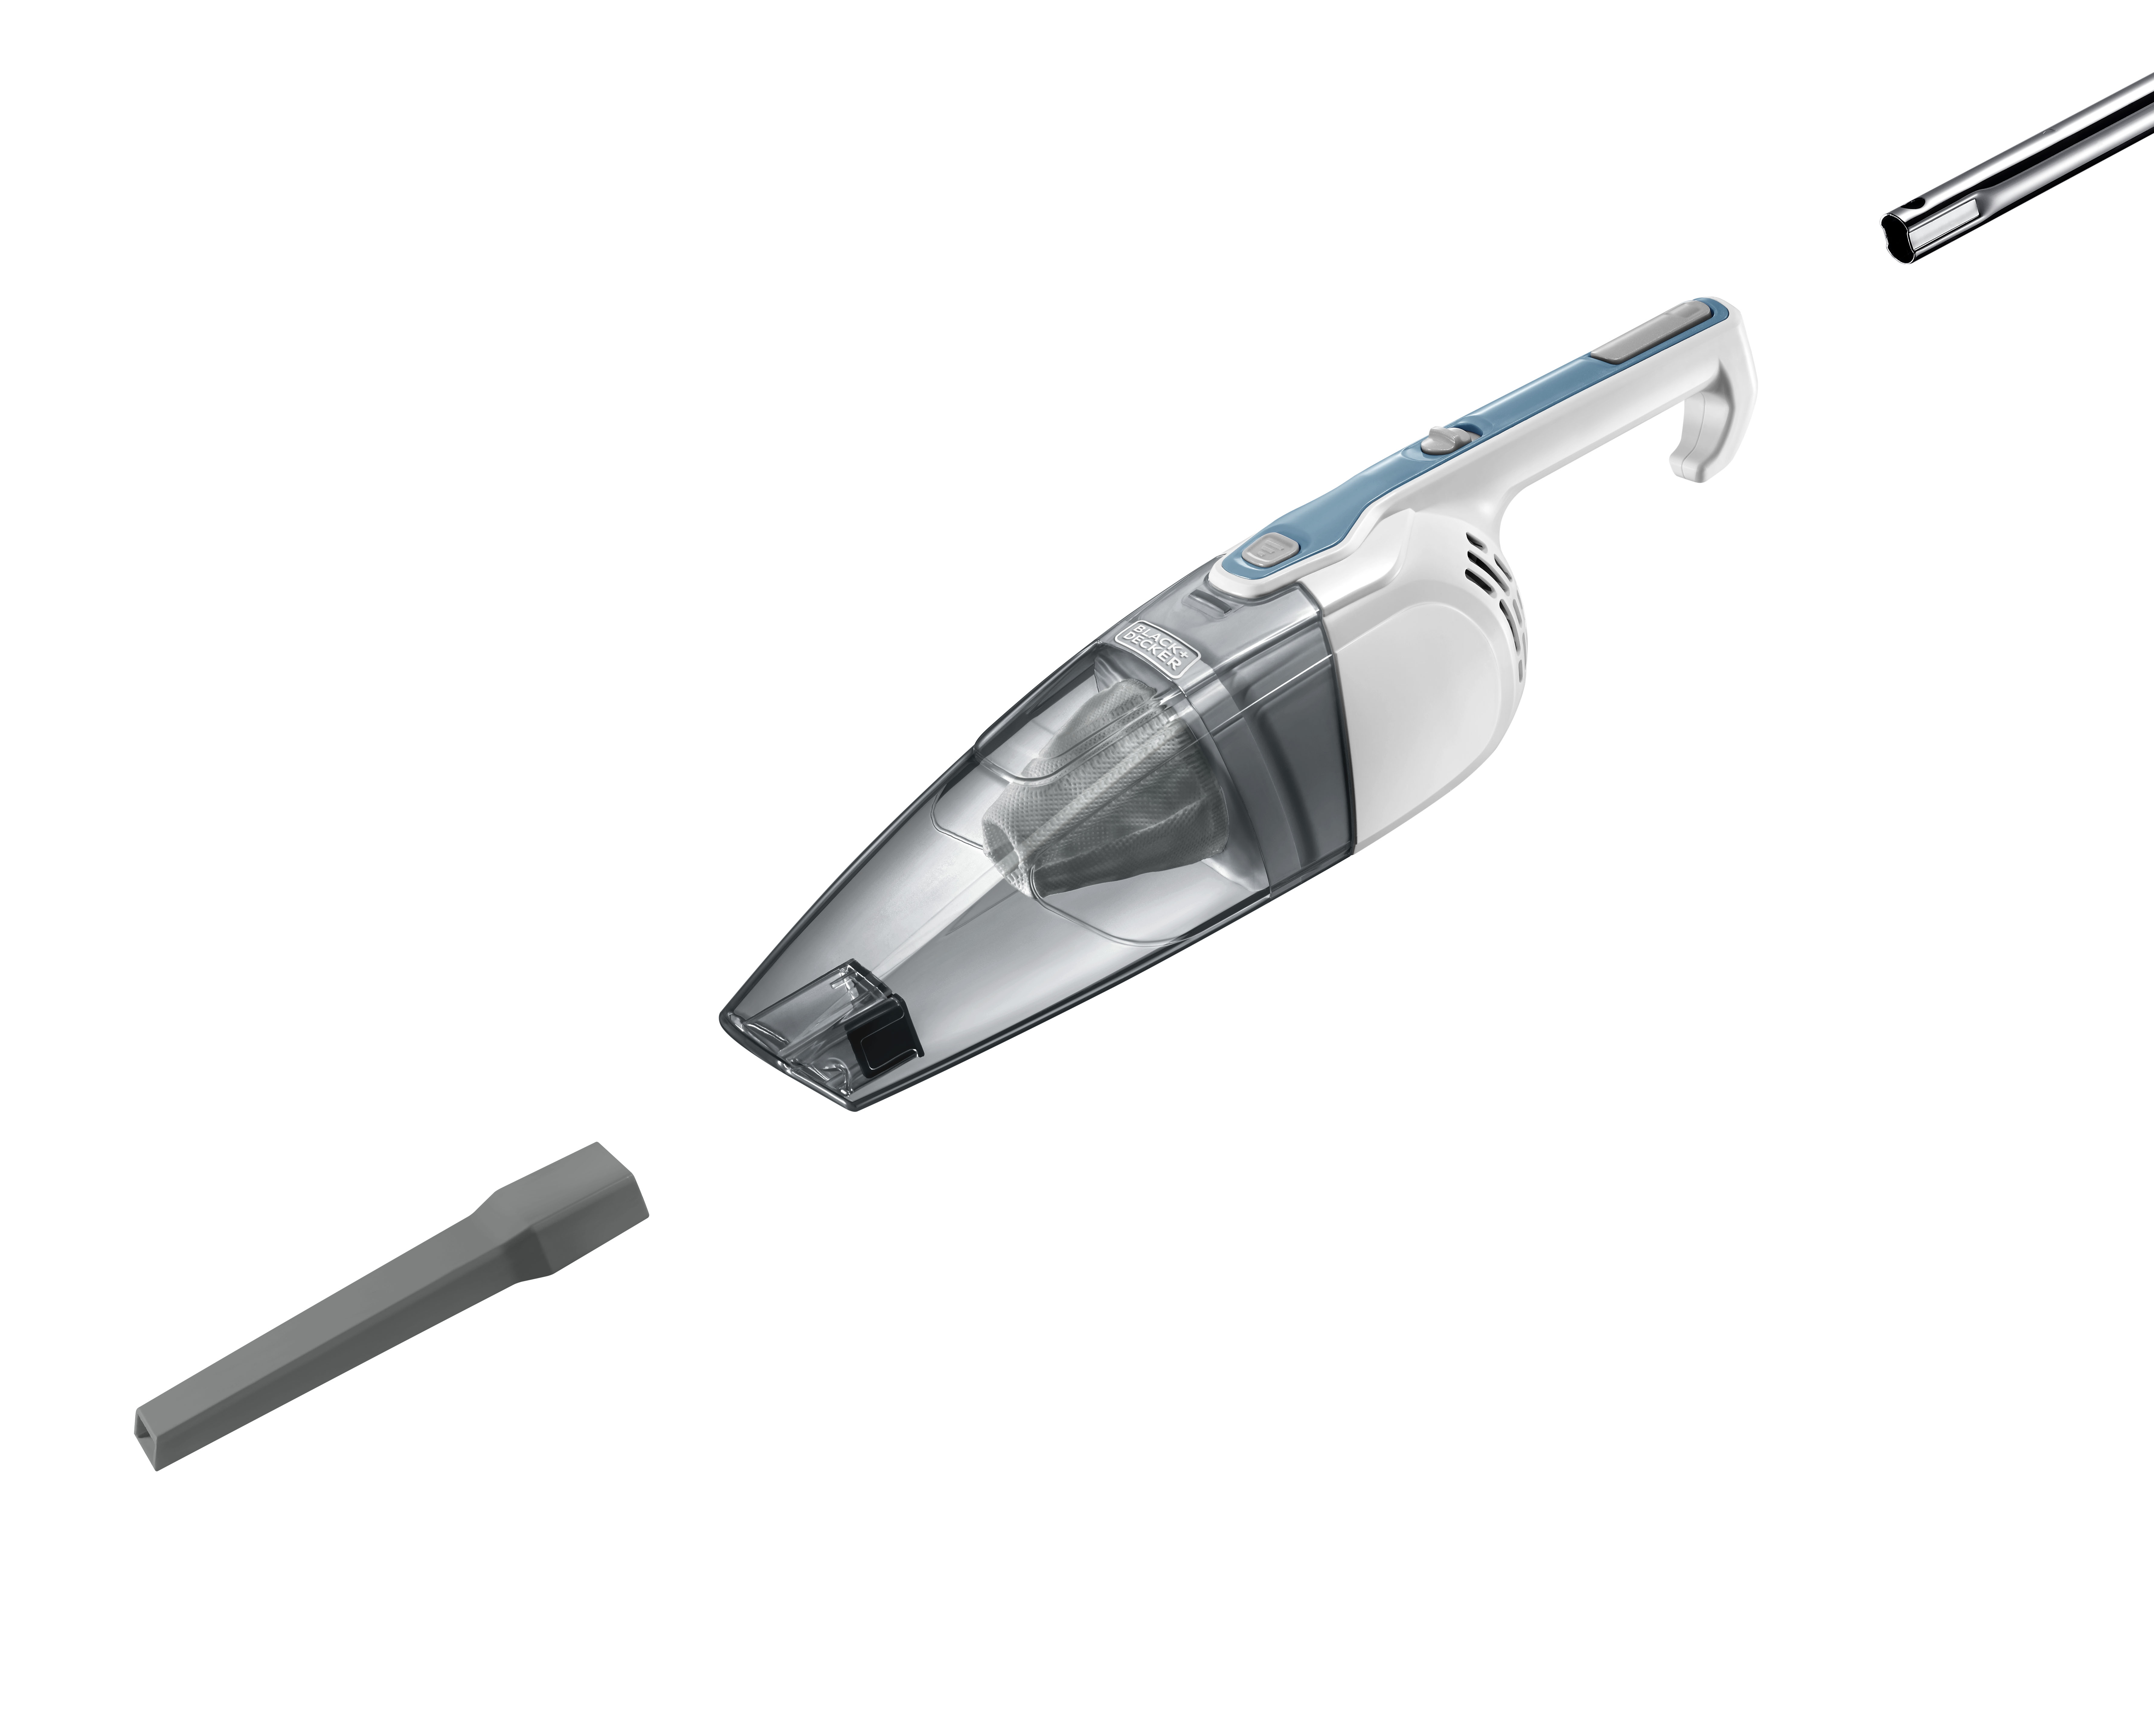 Black and Decker 3-in-1 Lightweight Corded Stick Vacuum - image 5 of 9